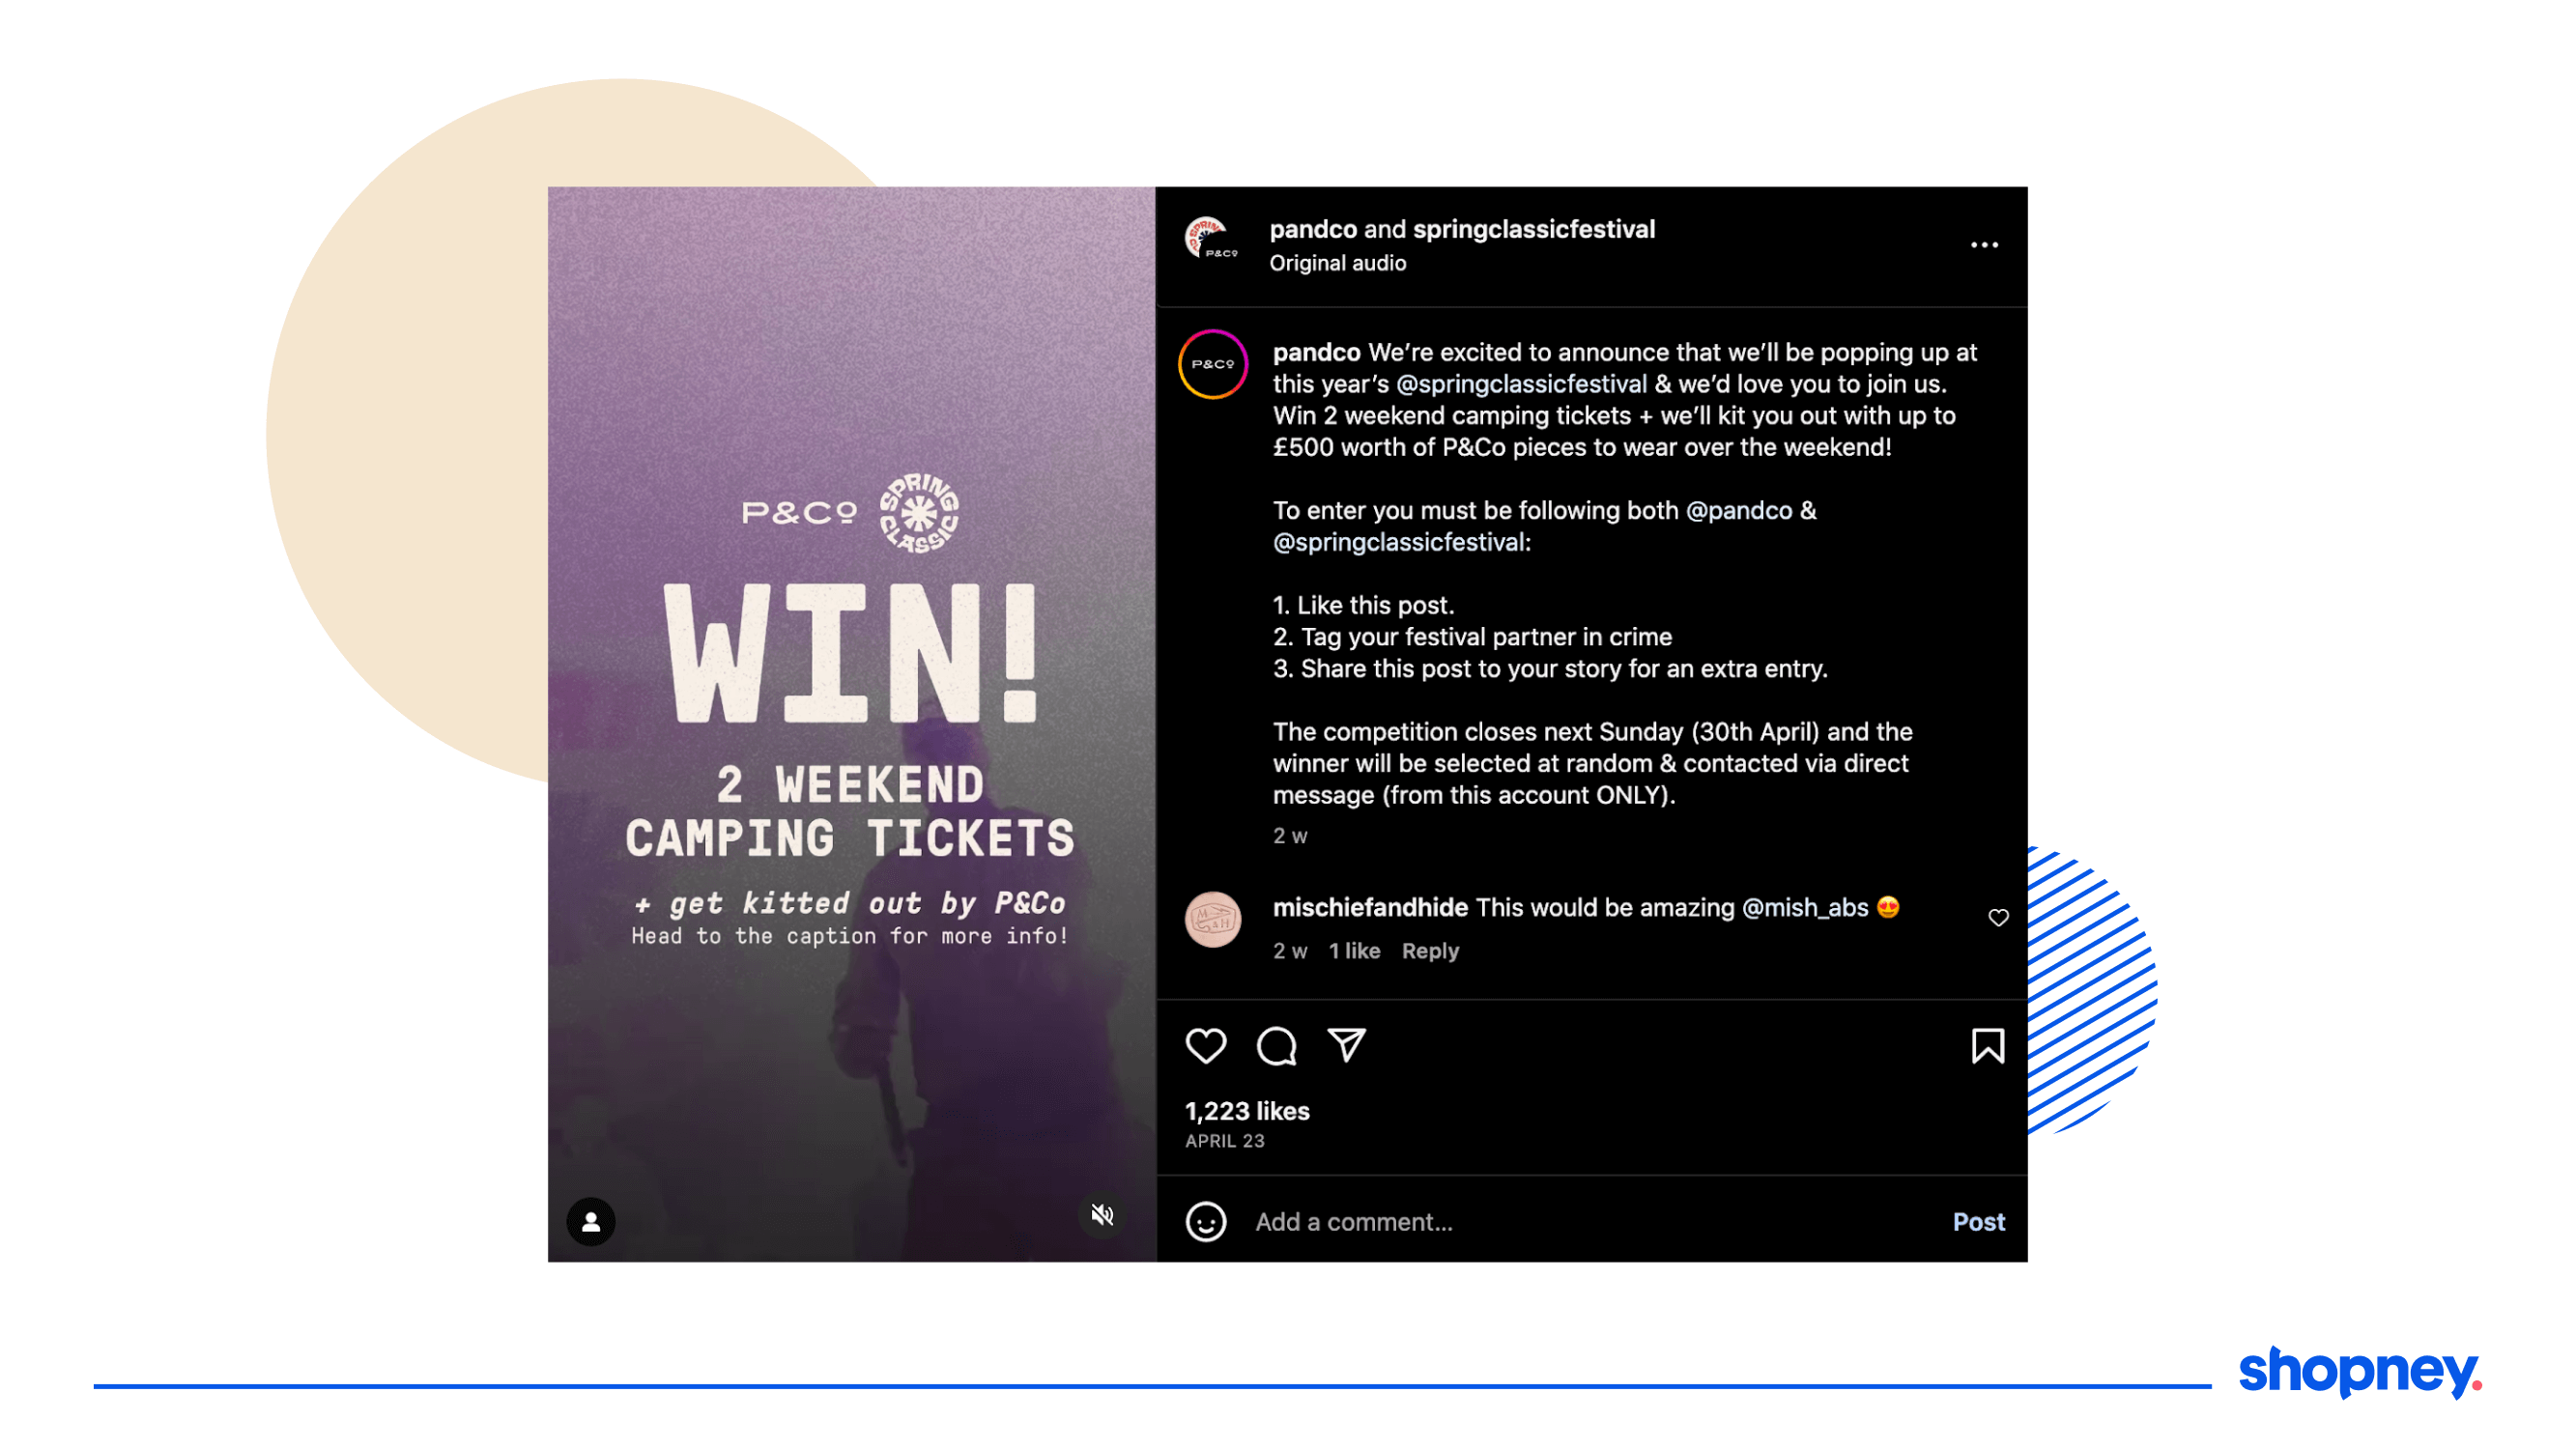 App-exclusive contest sample on social media